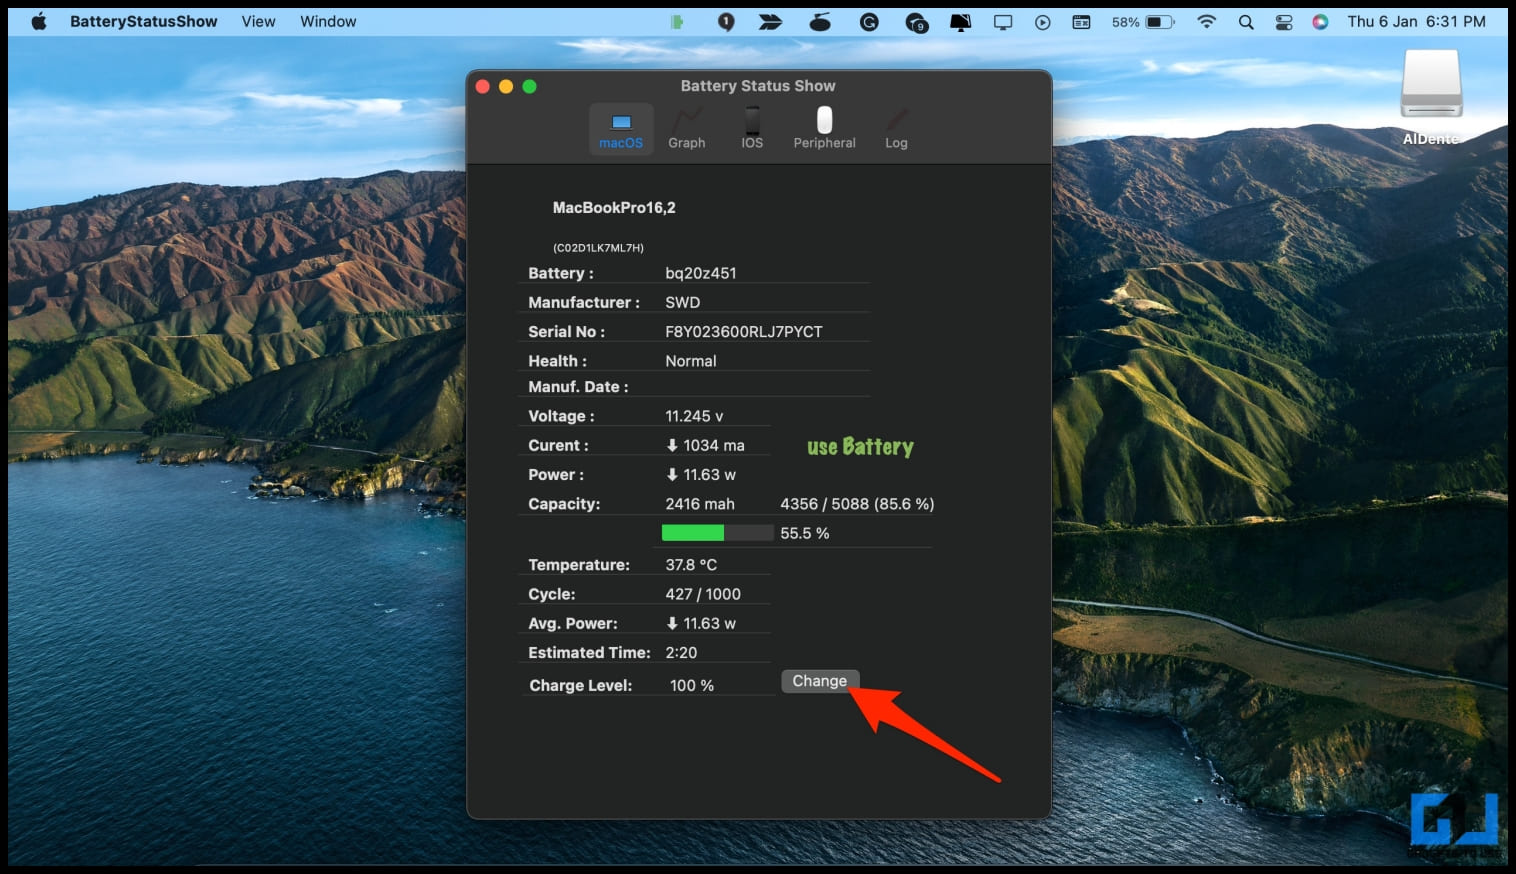 Stop charging your MacBook to 80 using BatteryStatusShow